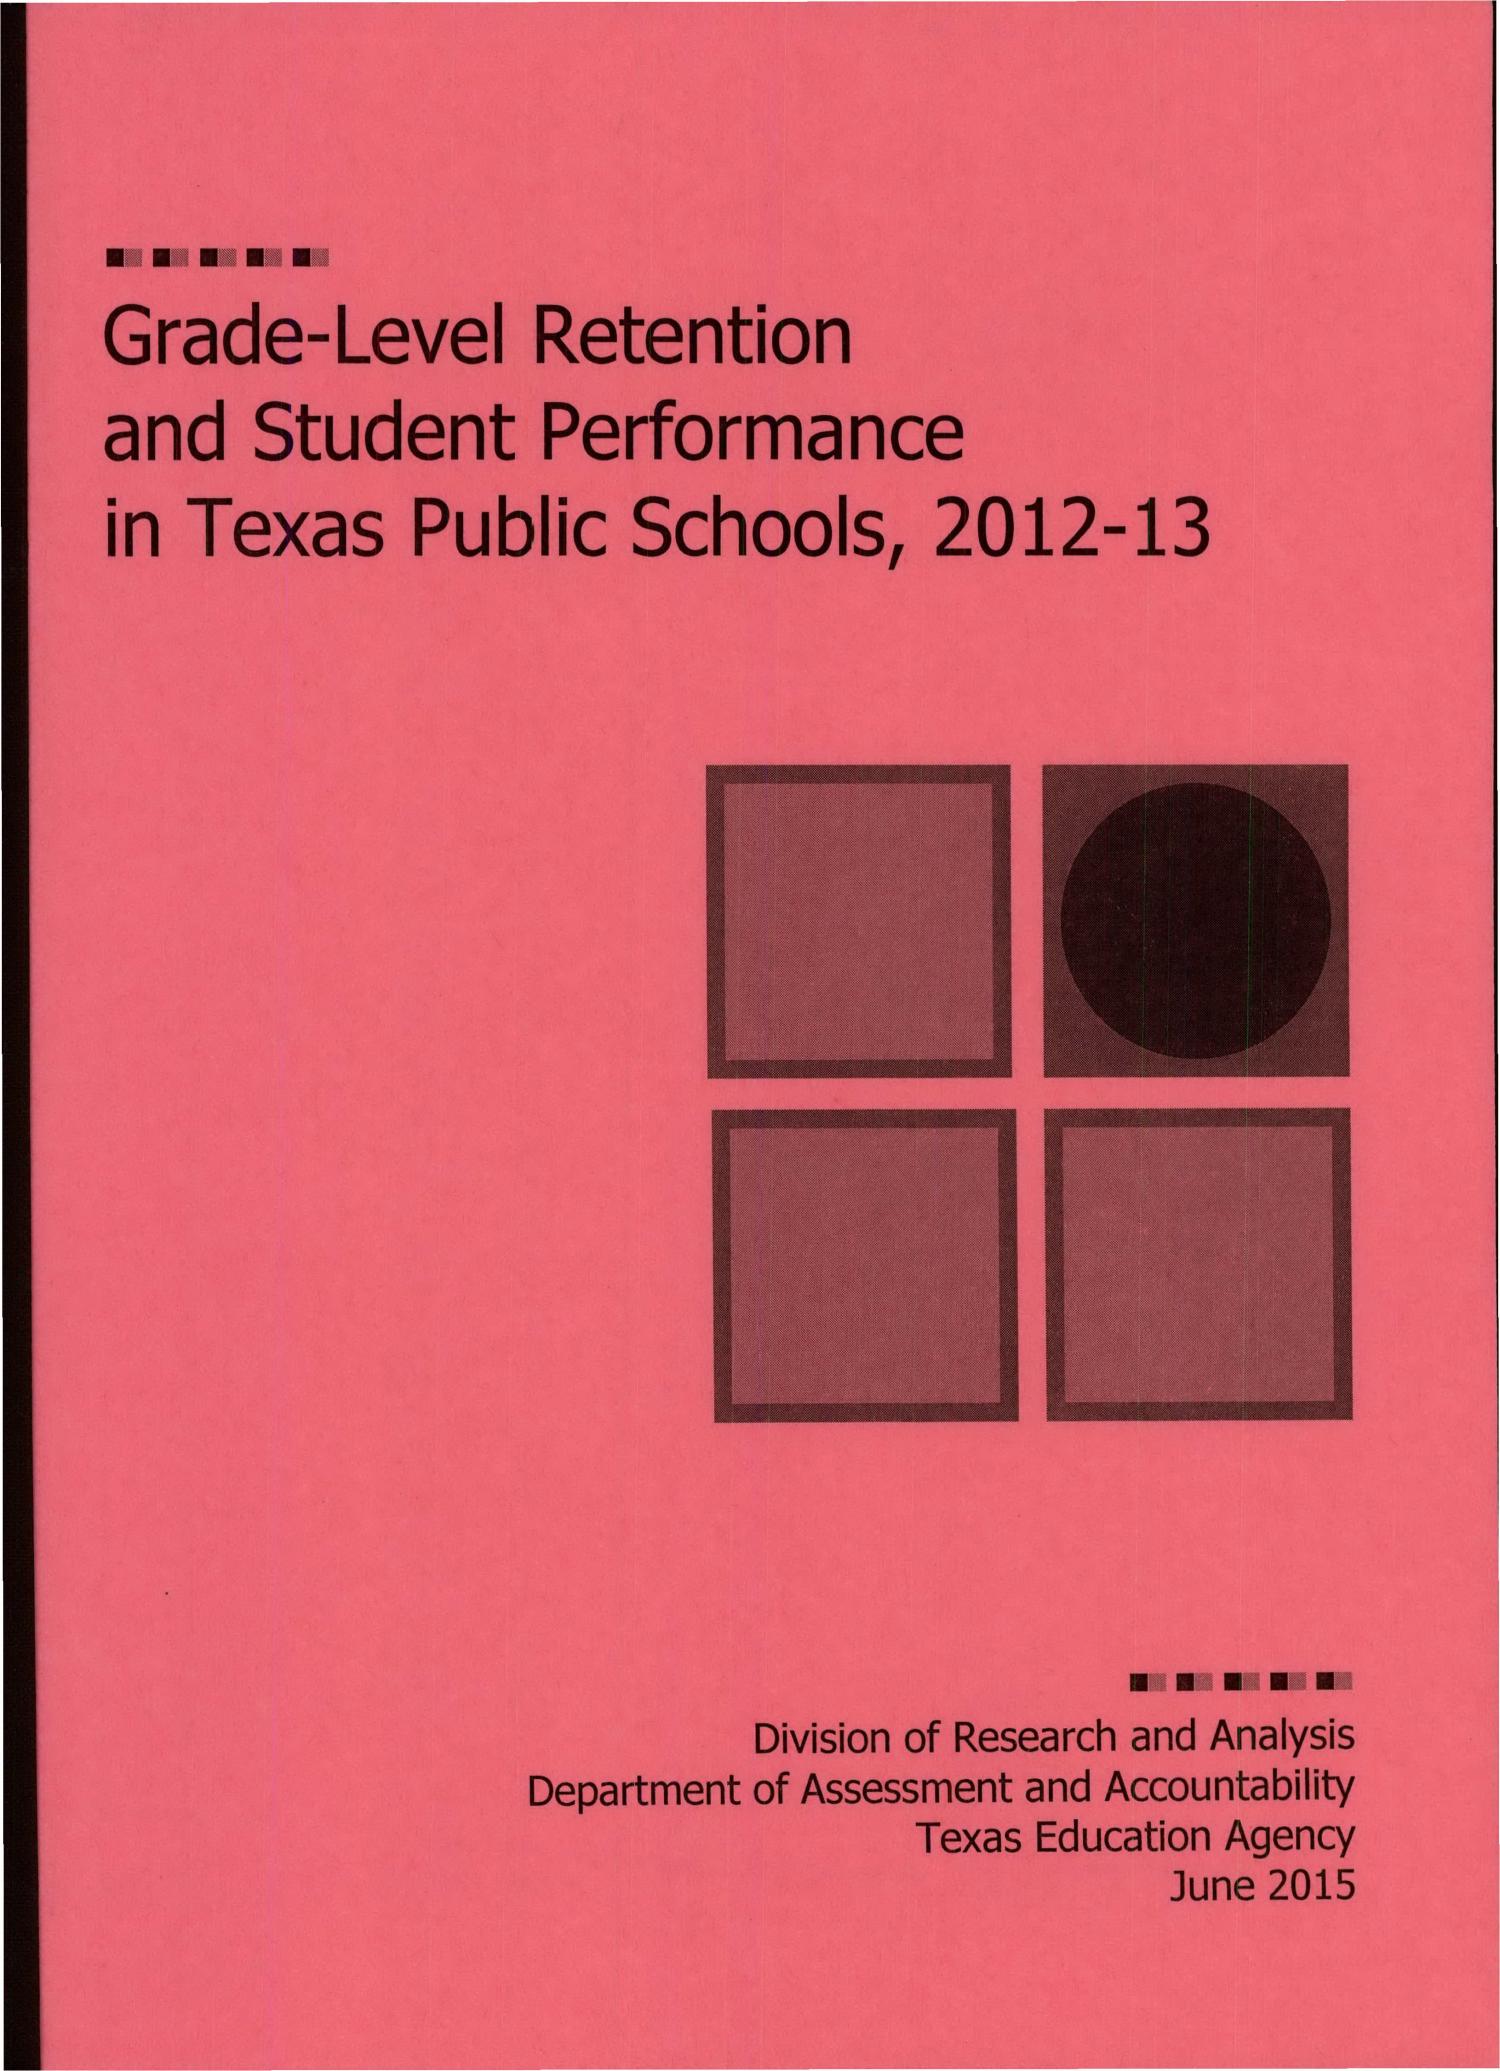 Grade-Level Retention and Student Performance in Texas Public Schools: 2012-2013
                                                
                                                    Front Cover
                                                